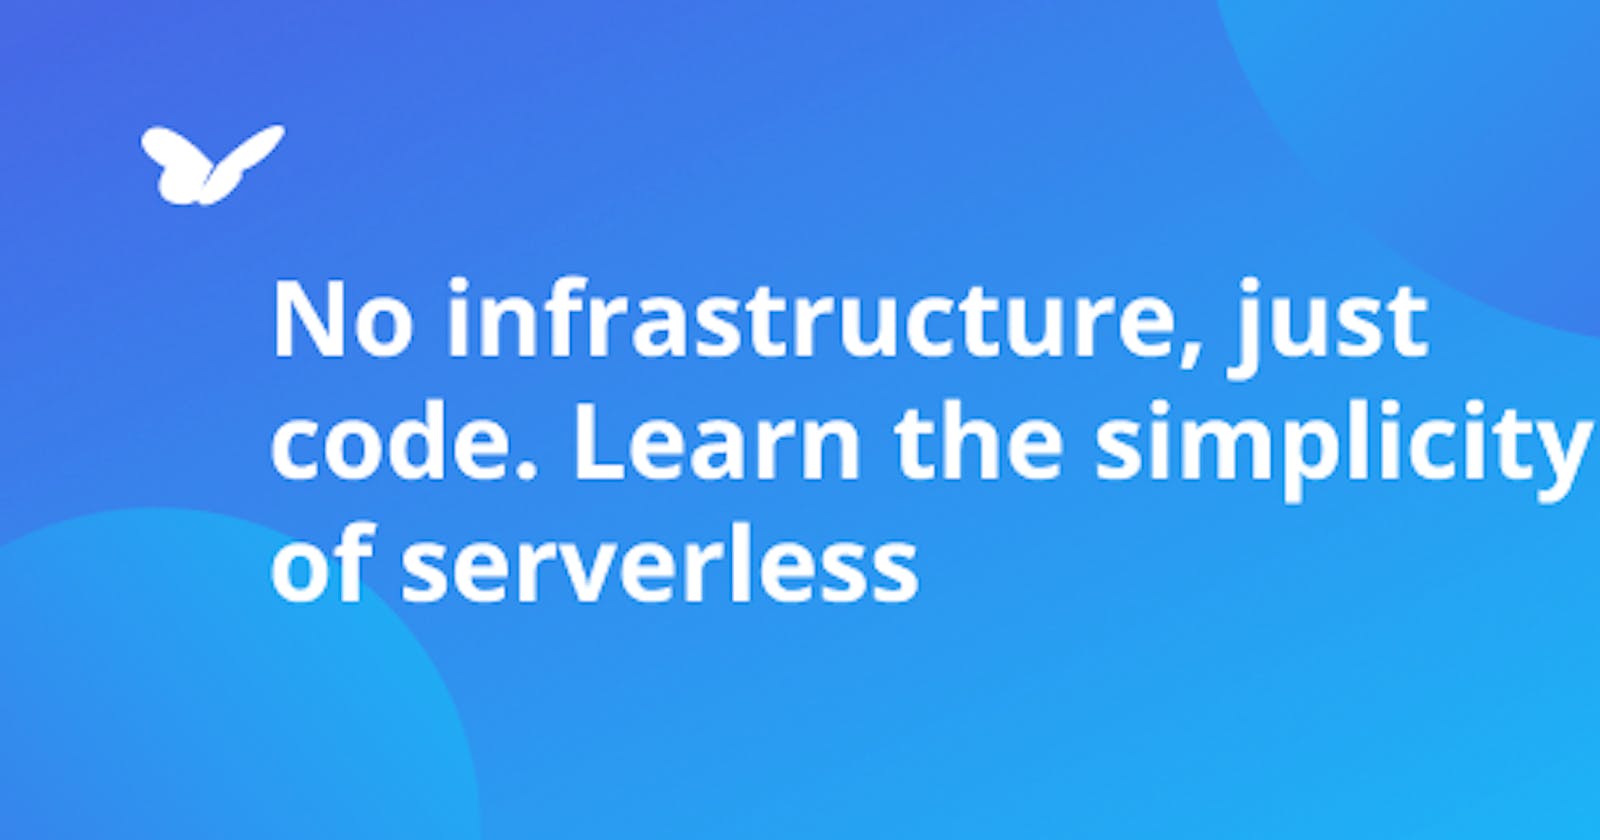 No infrastructure, just code. Learn the simplicity of serverless